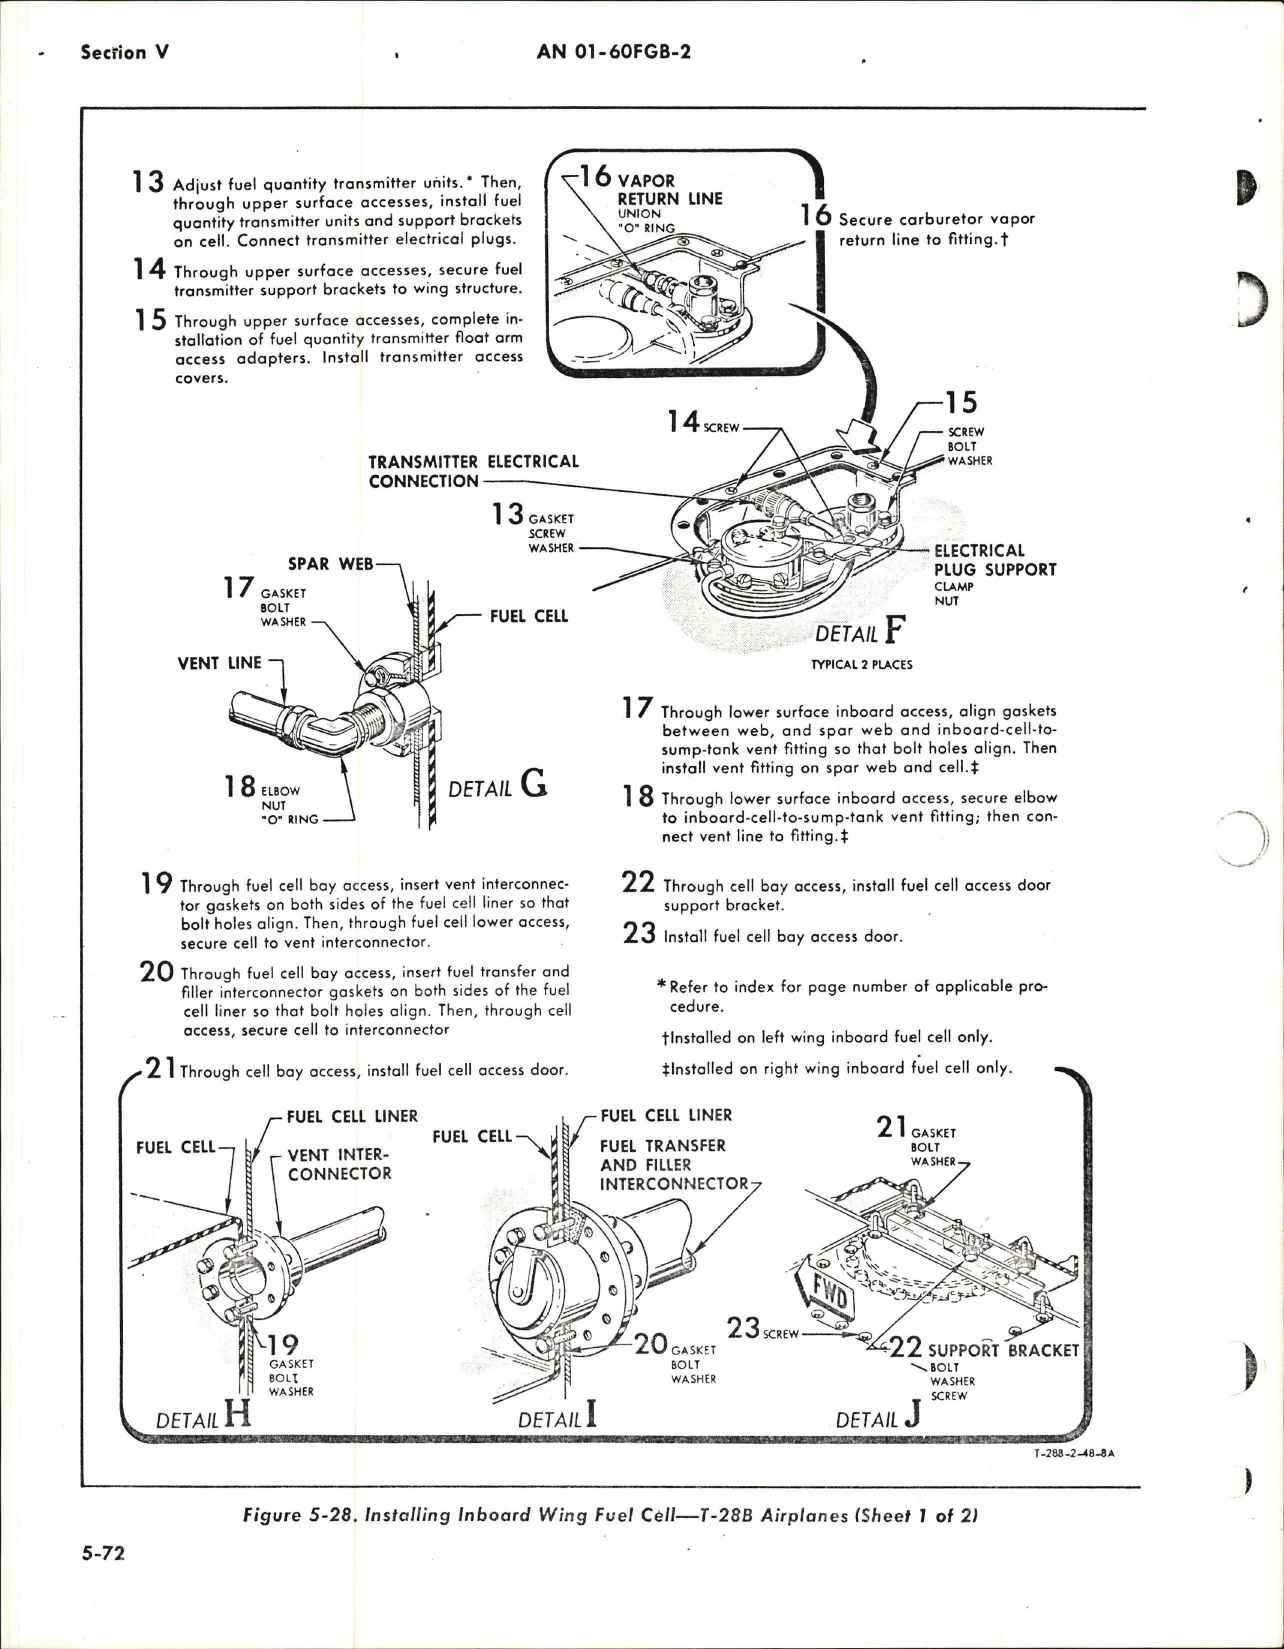 Sample page 5 from AirCorps Library document: Maintenance Instructions for T-28B and T-28C